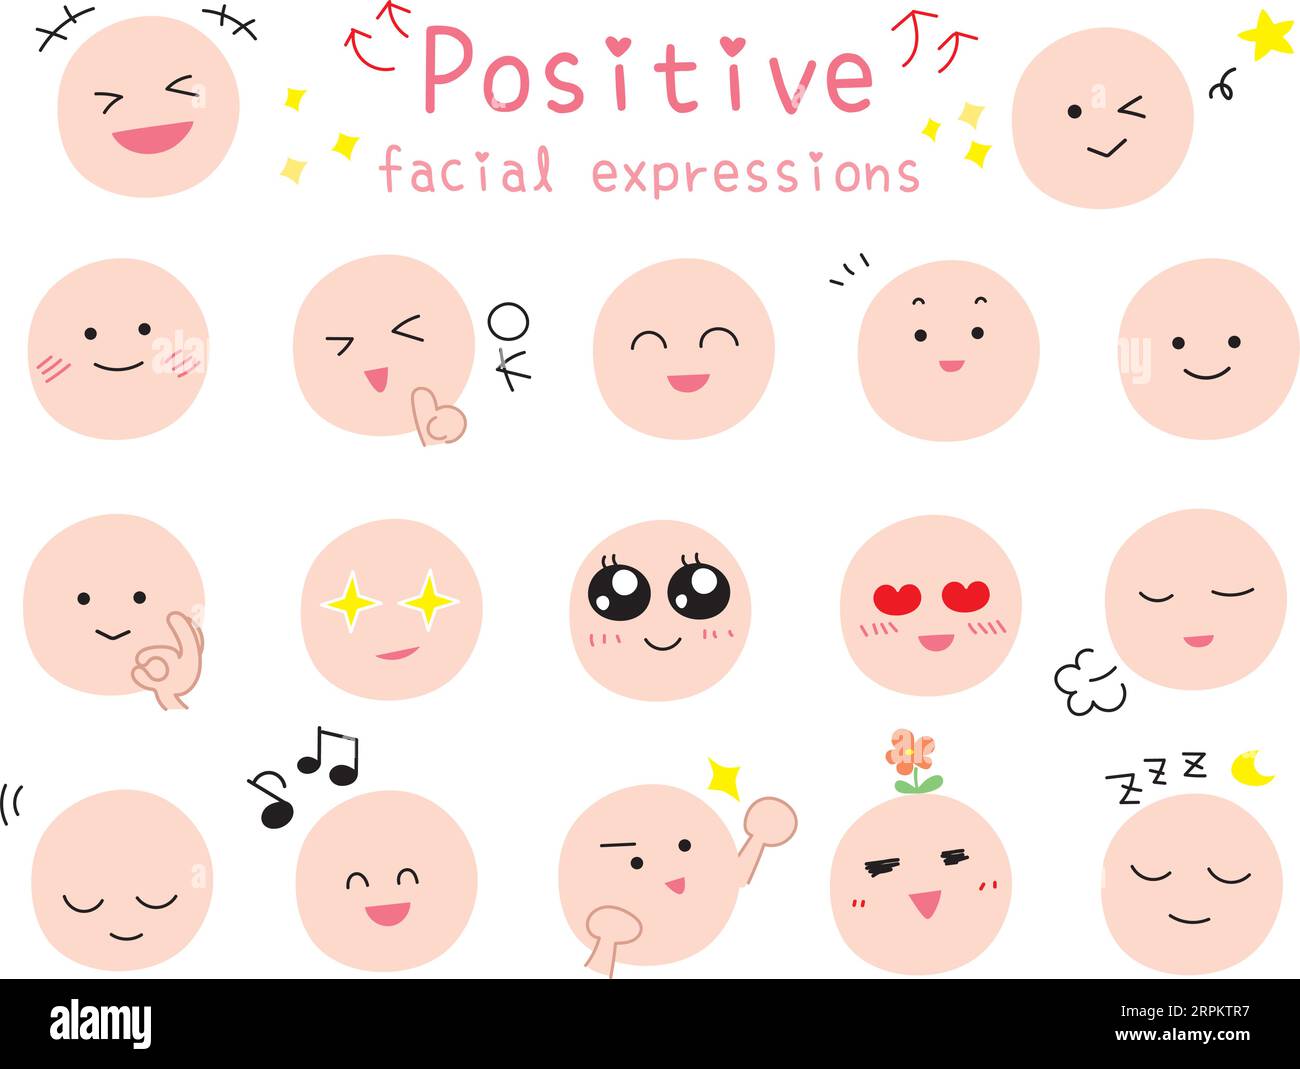 Simple and cute positive facial expression icon set. Colored flat design illustration.  Collection of funny emojis. Stock Vector